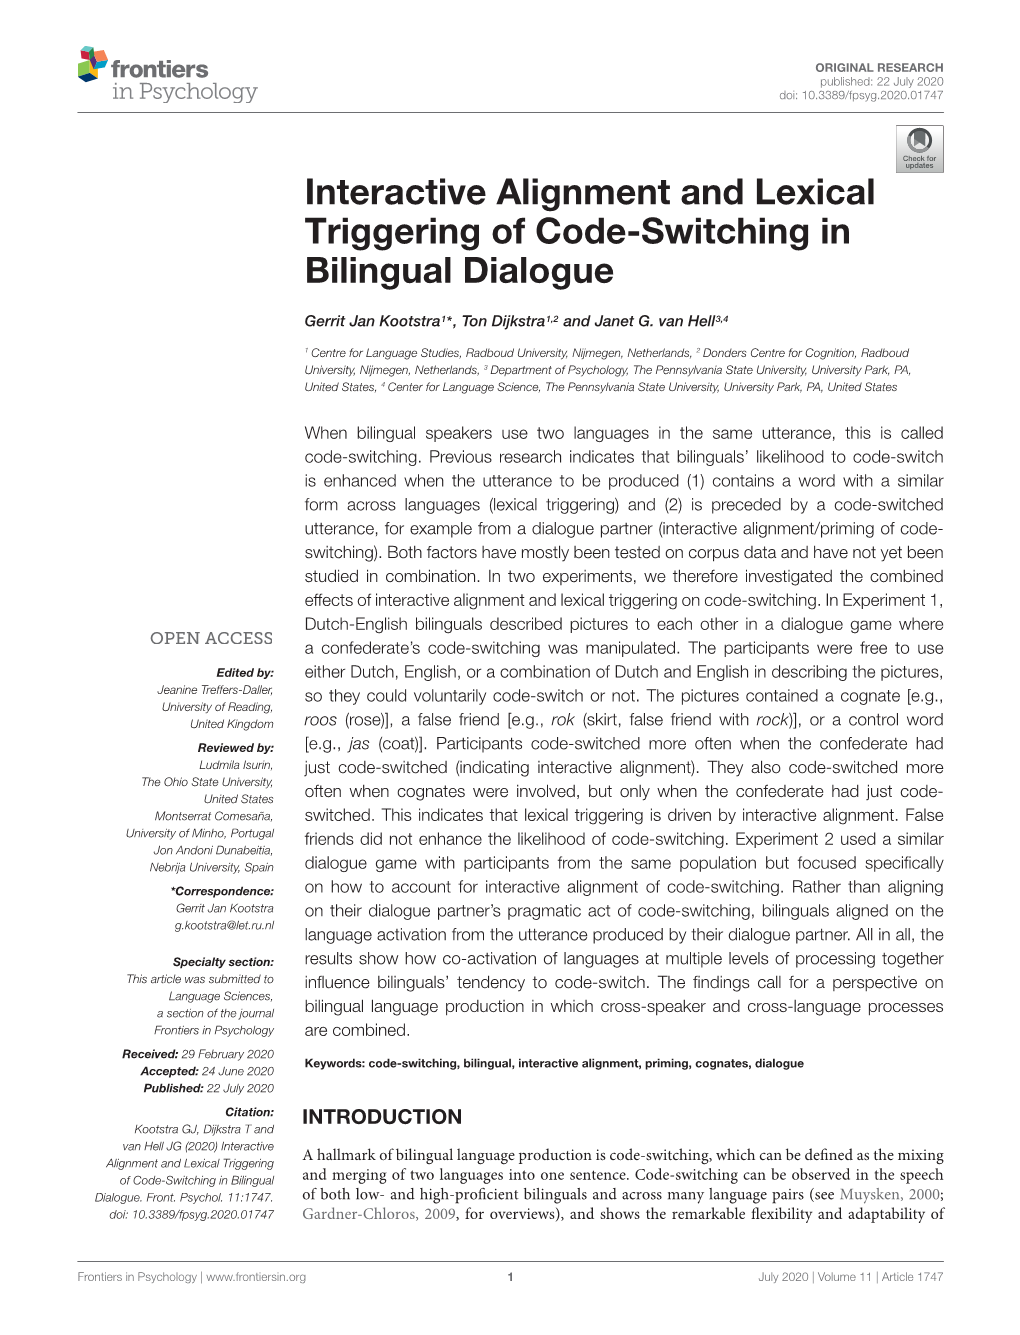 Interactive Alignment and Lexical Triggering of Code-Switching in Bilingual Dialogue